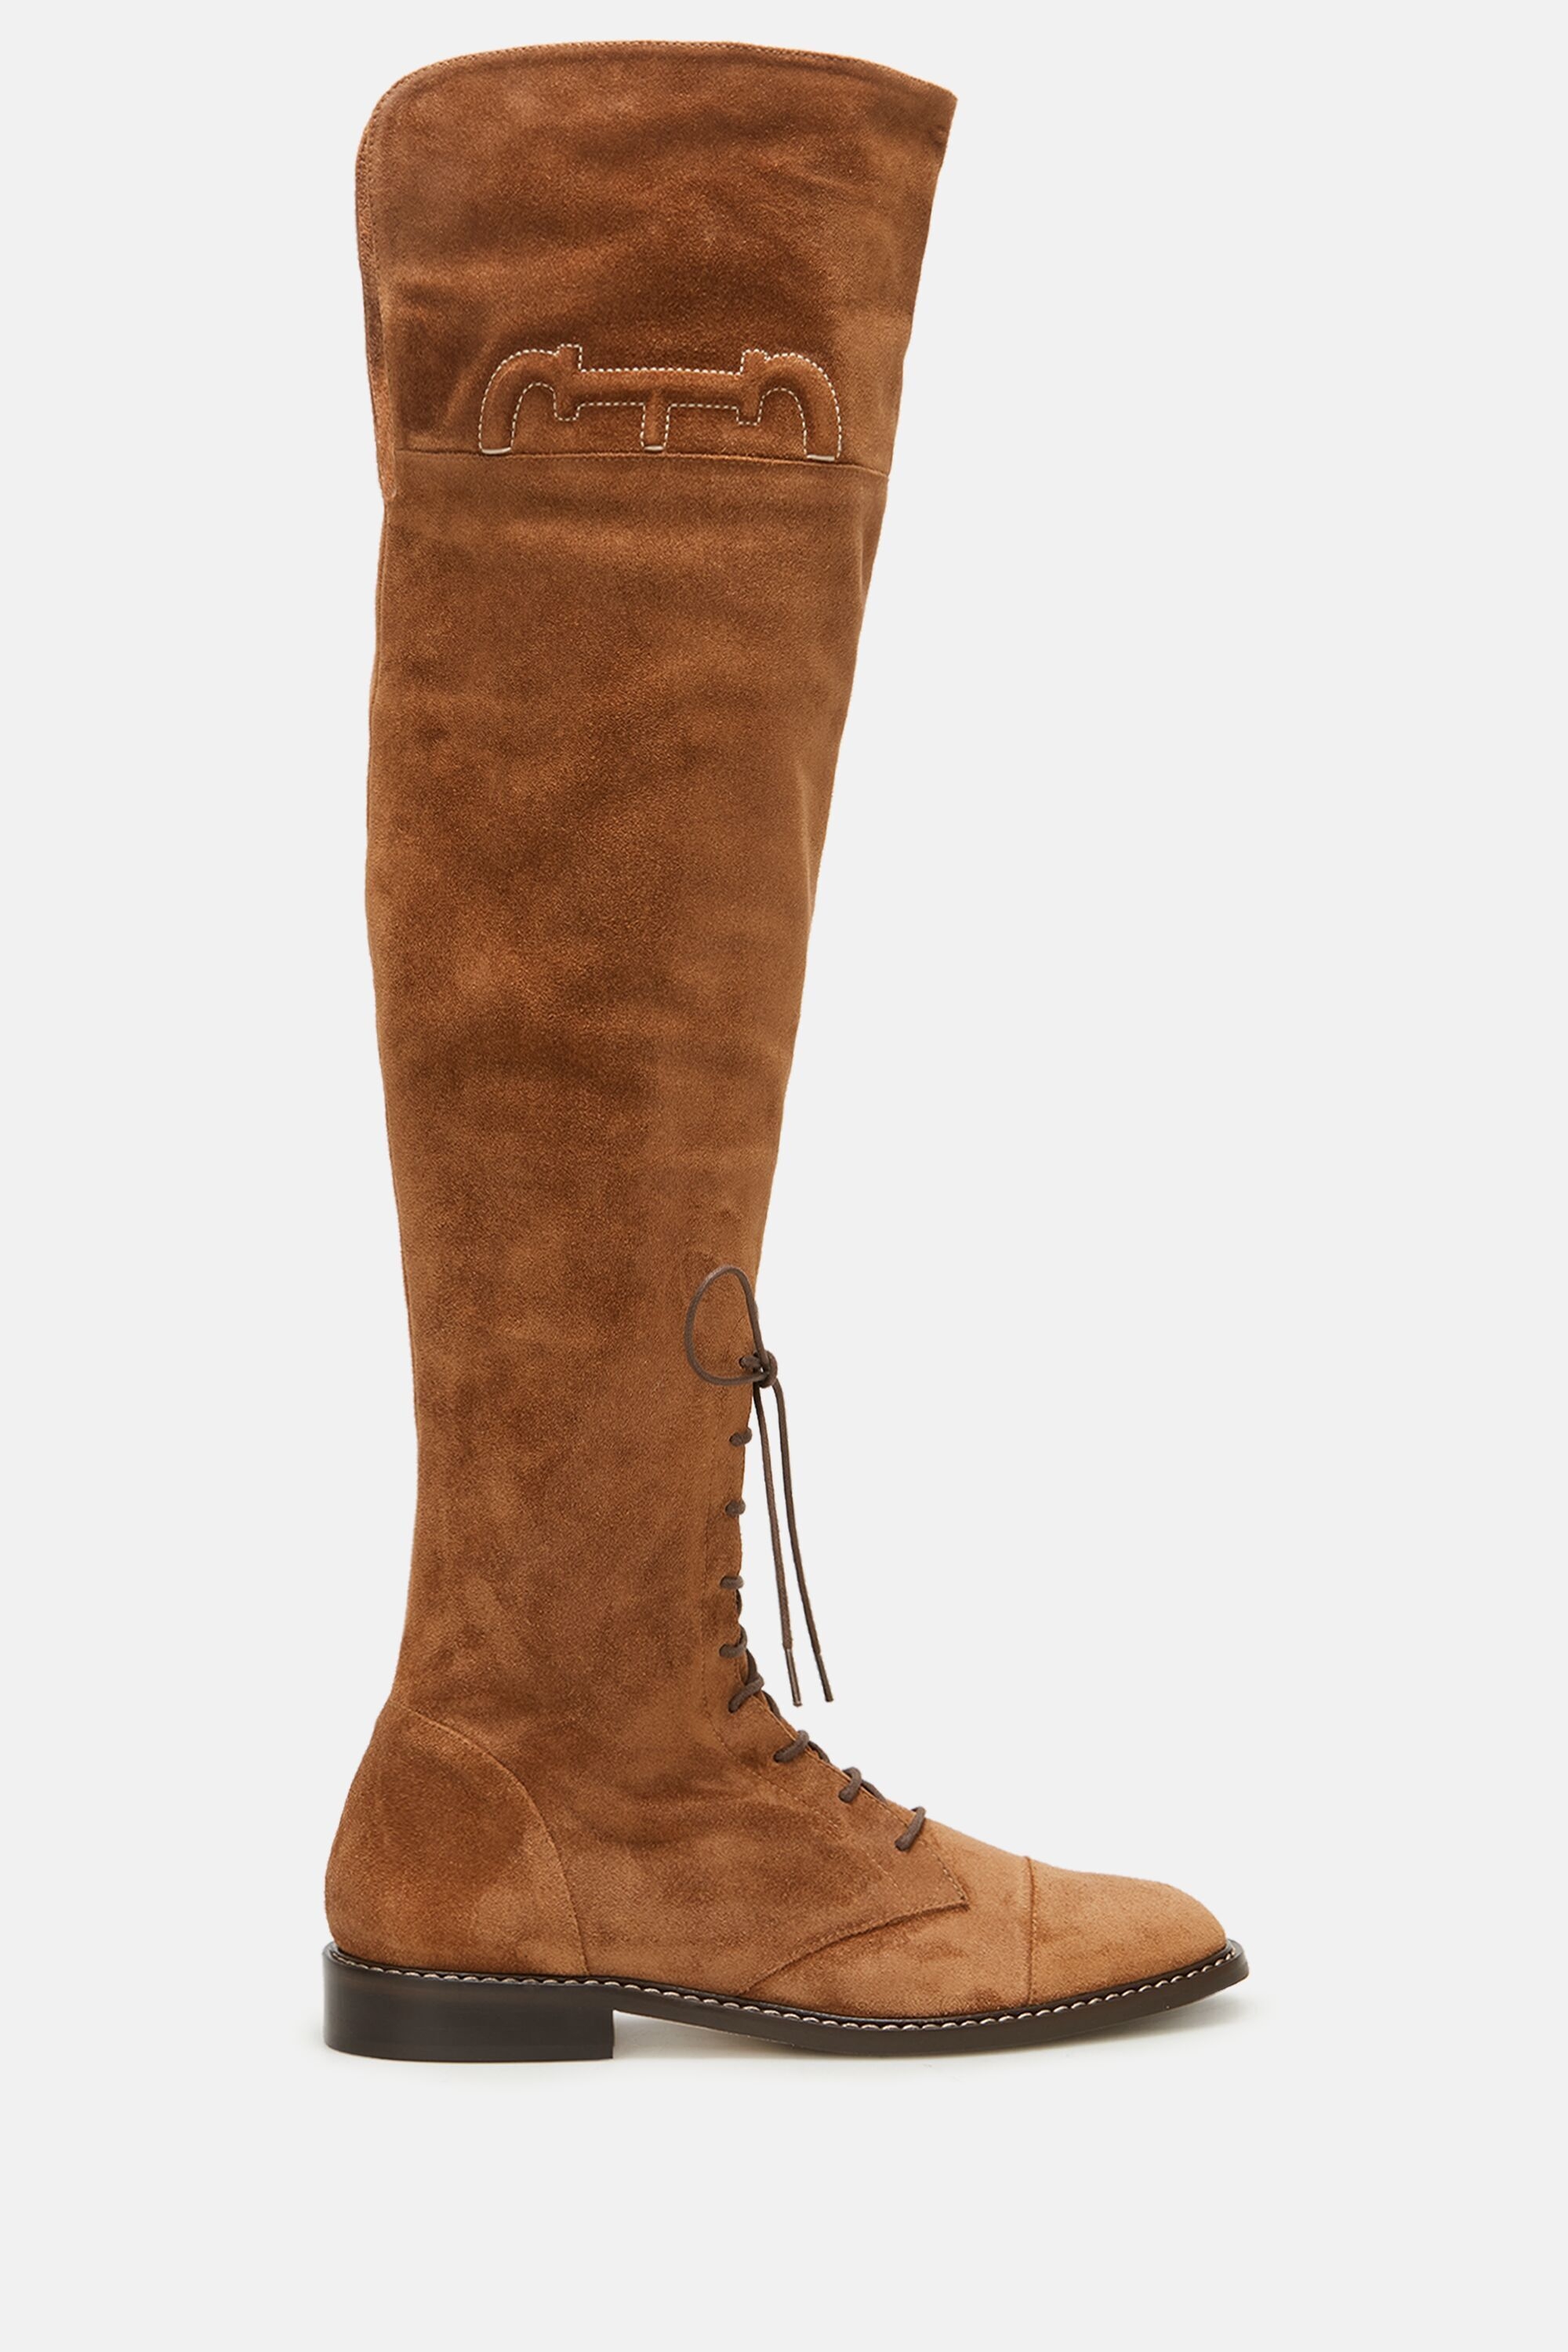 Doma Insignia Leather over-the-knee boots